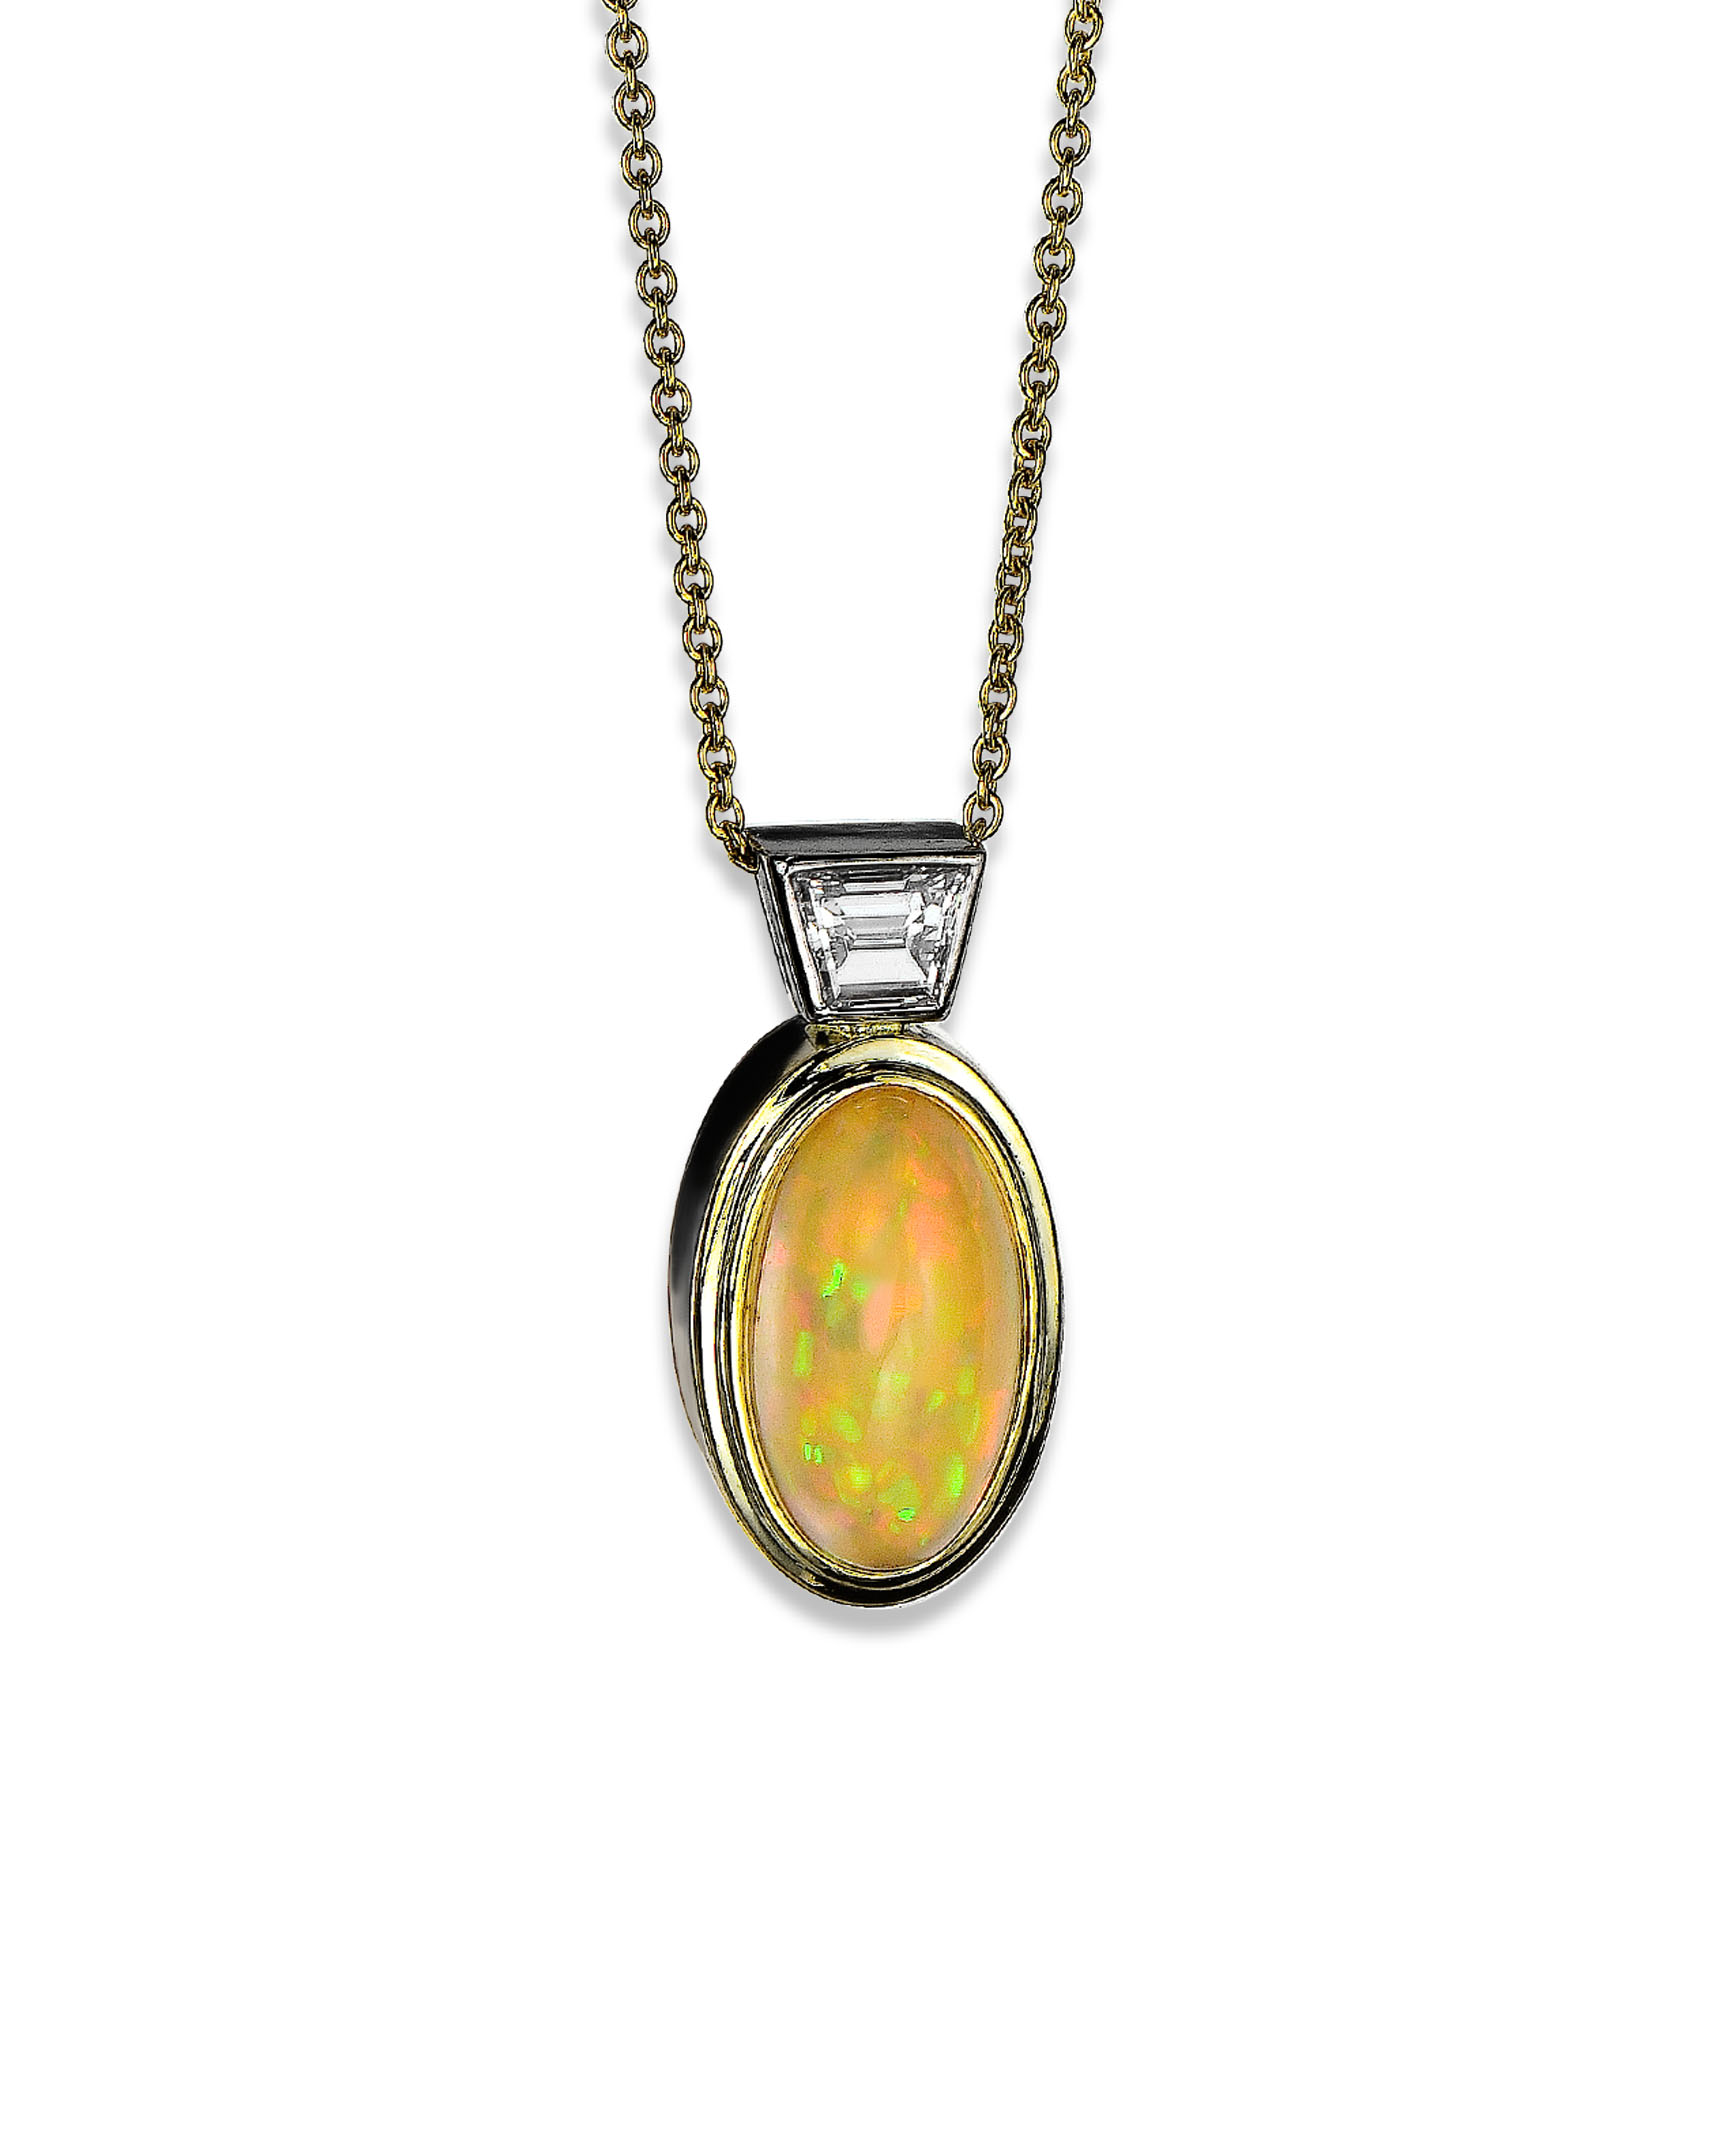 Buy Raw Opal Necklace Genuine Jewellery Natural Opal Ethiopian Opal Necklace  Jewelry sterling Silver Gift for Her Unique Gift Online in India - Etsy